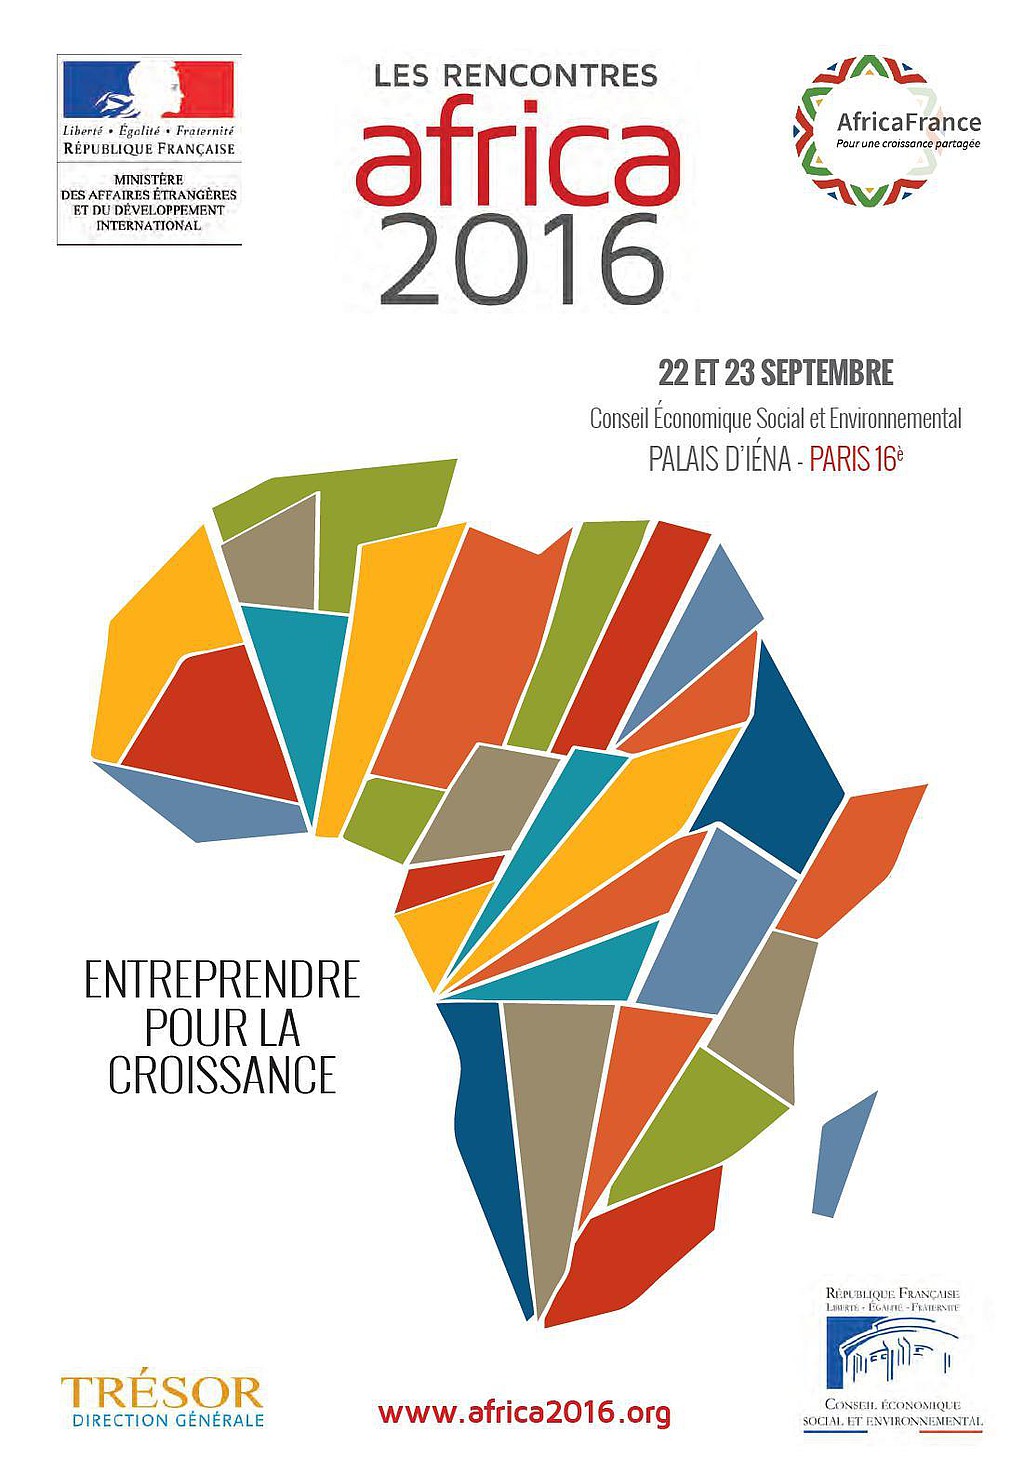 csm rencontres africa 2016 a7bded8c2f